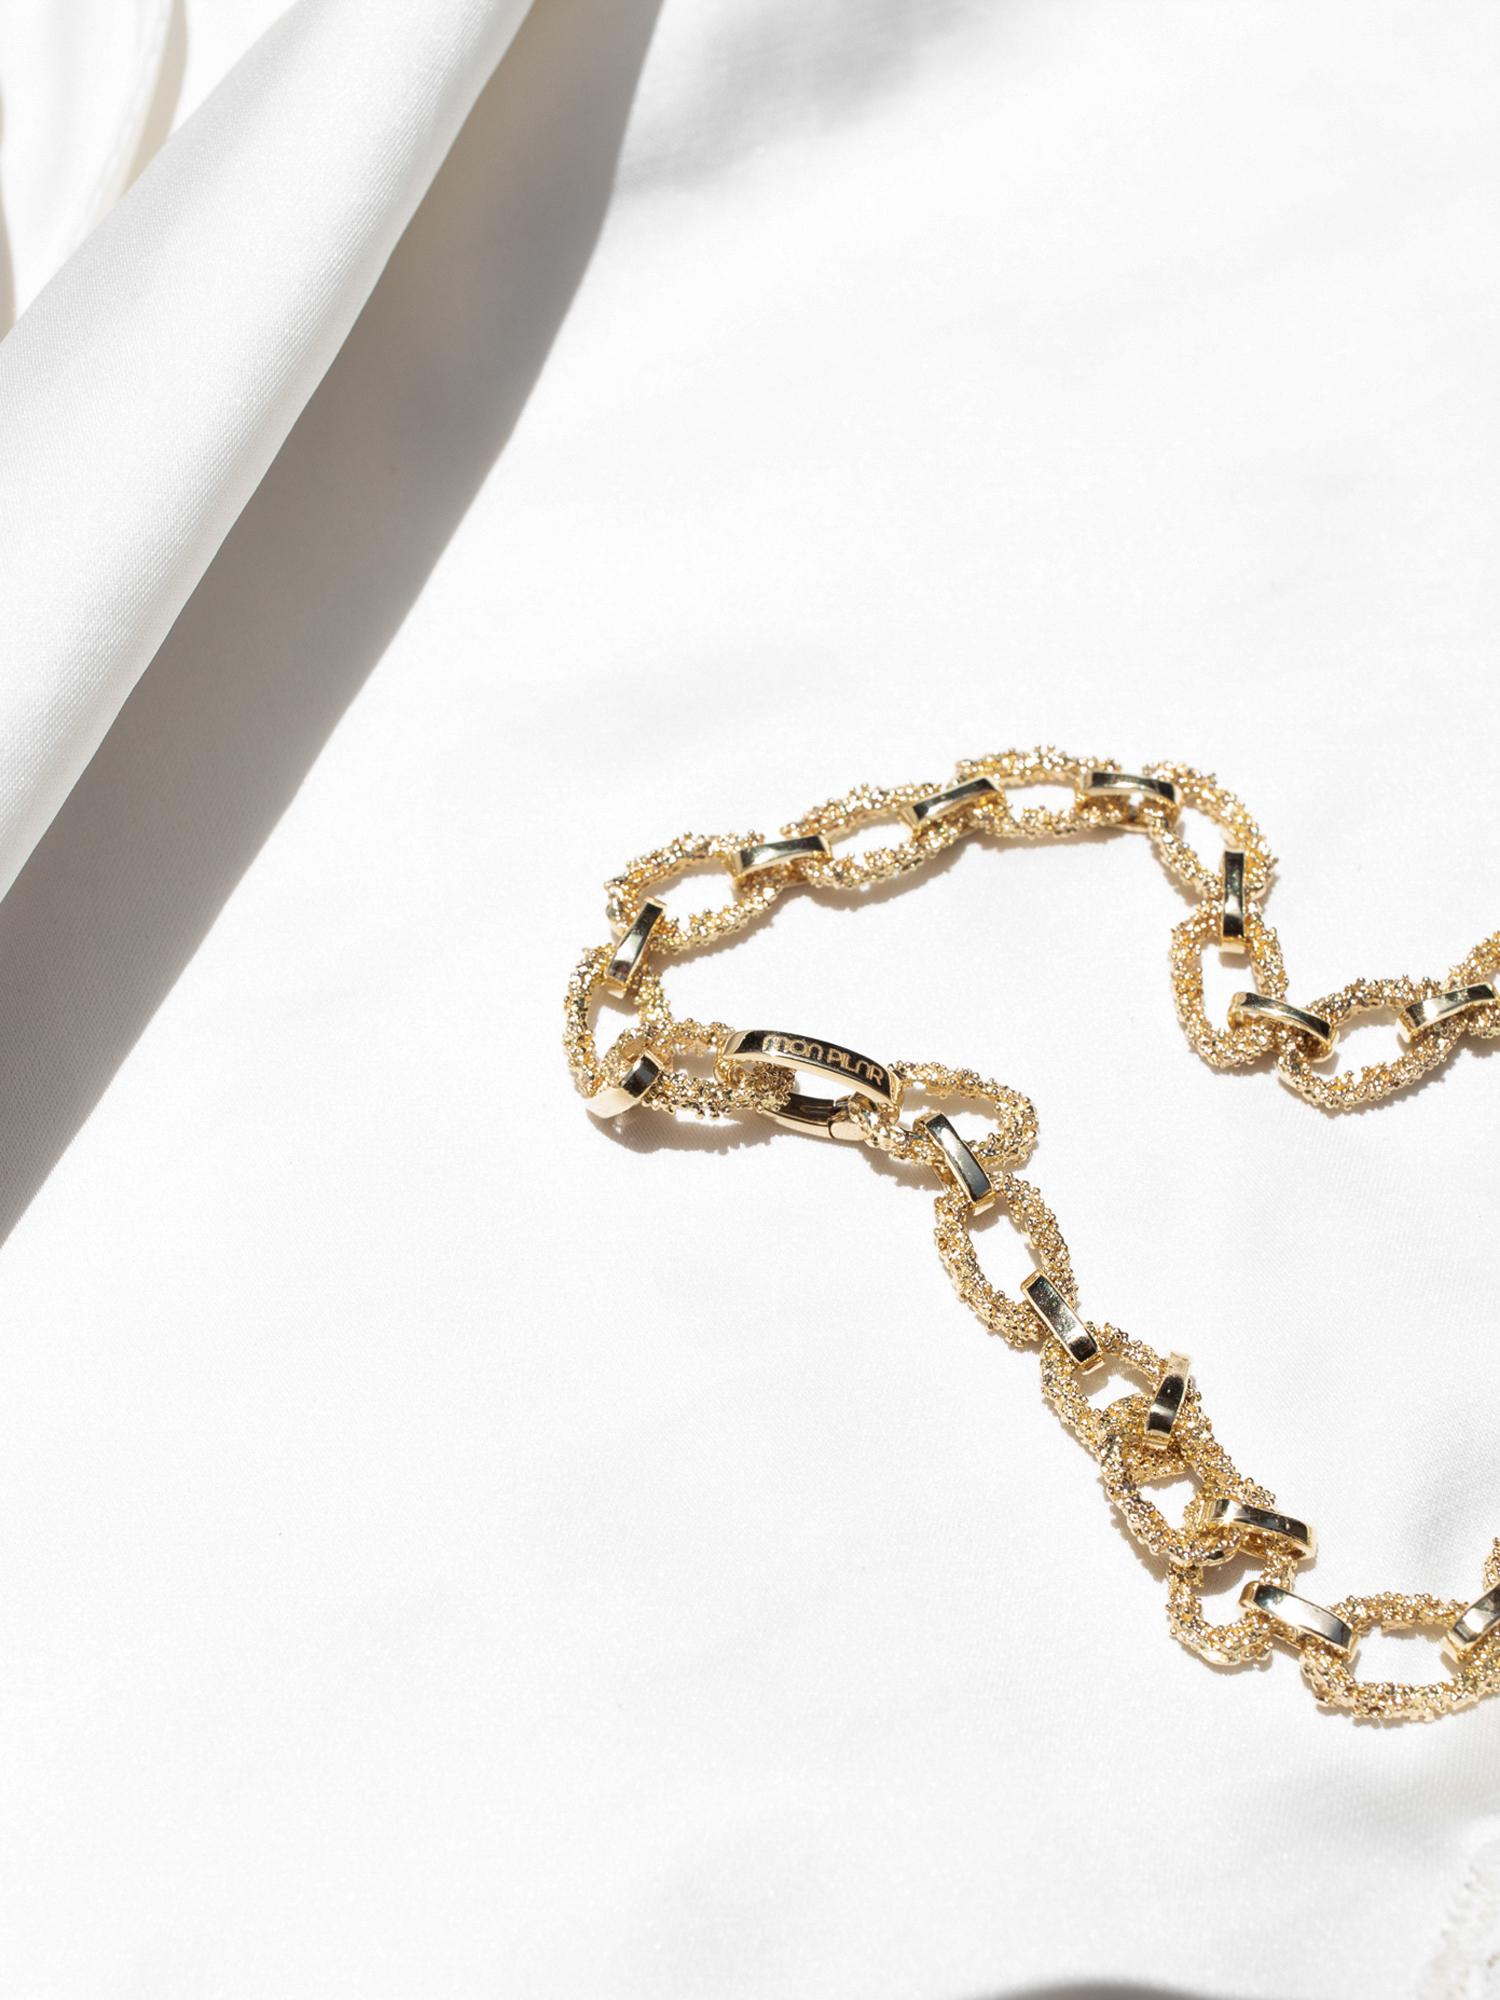 14 Karat Gold Etruscan Granulation Chain Link Necklace by Mon Pilar In New Condition For Sale In Brooklyn, NY